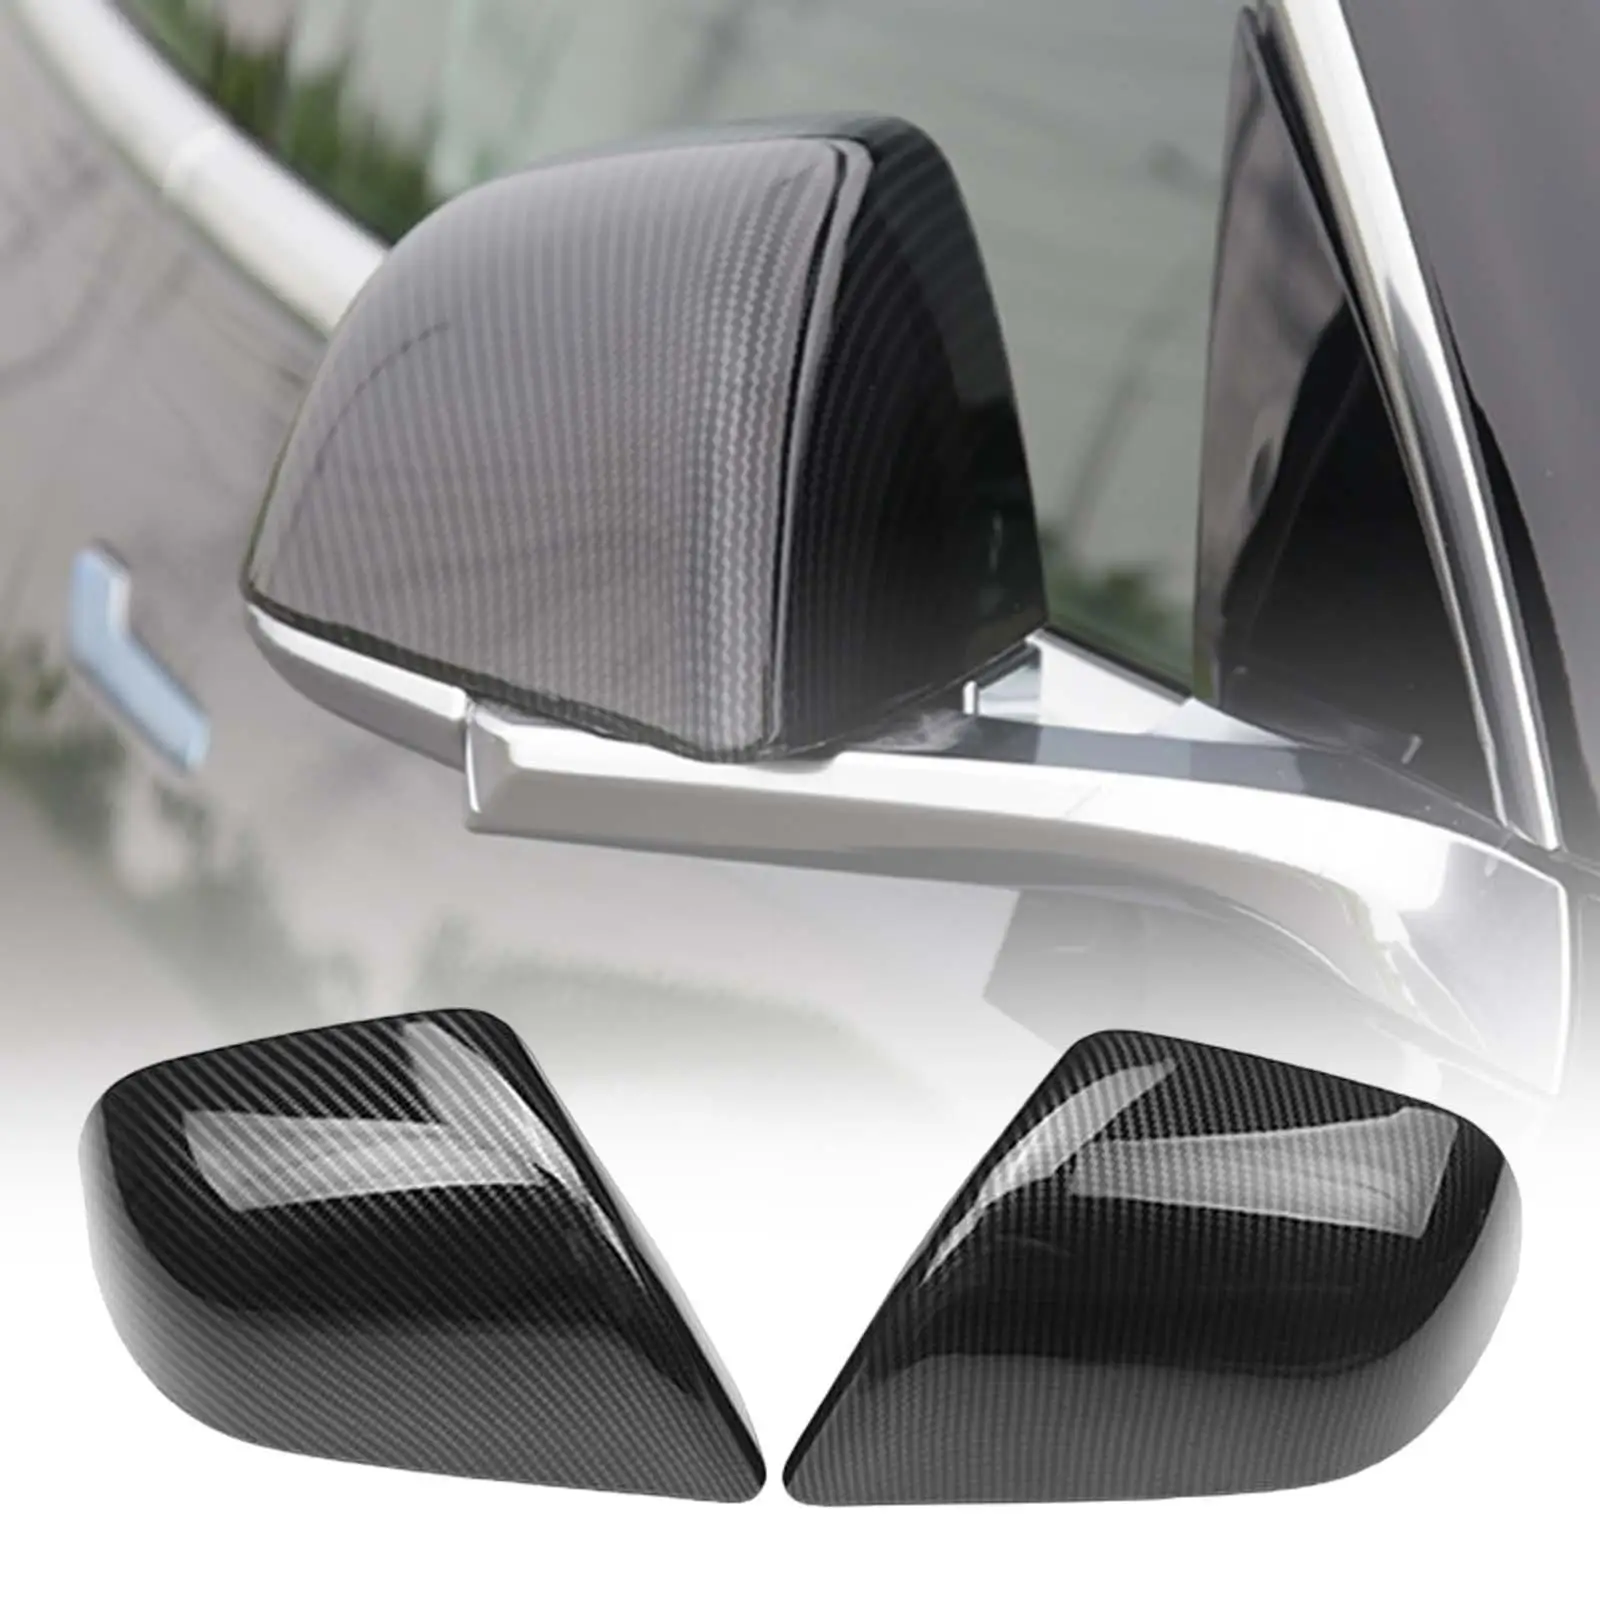  Rear Rear Mirror Covers Stickers Trim for Tesla Replacement